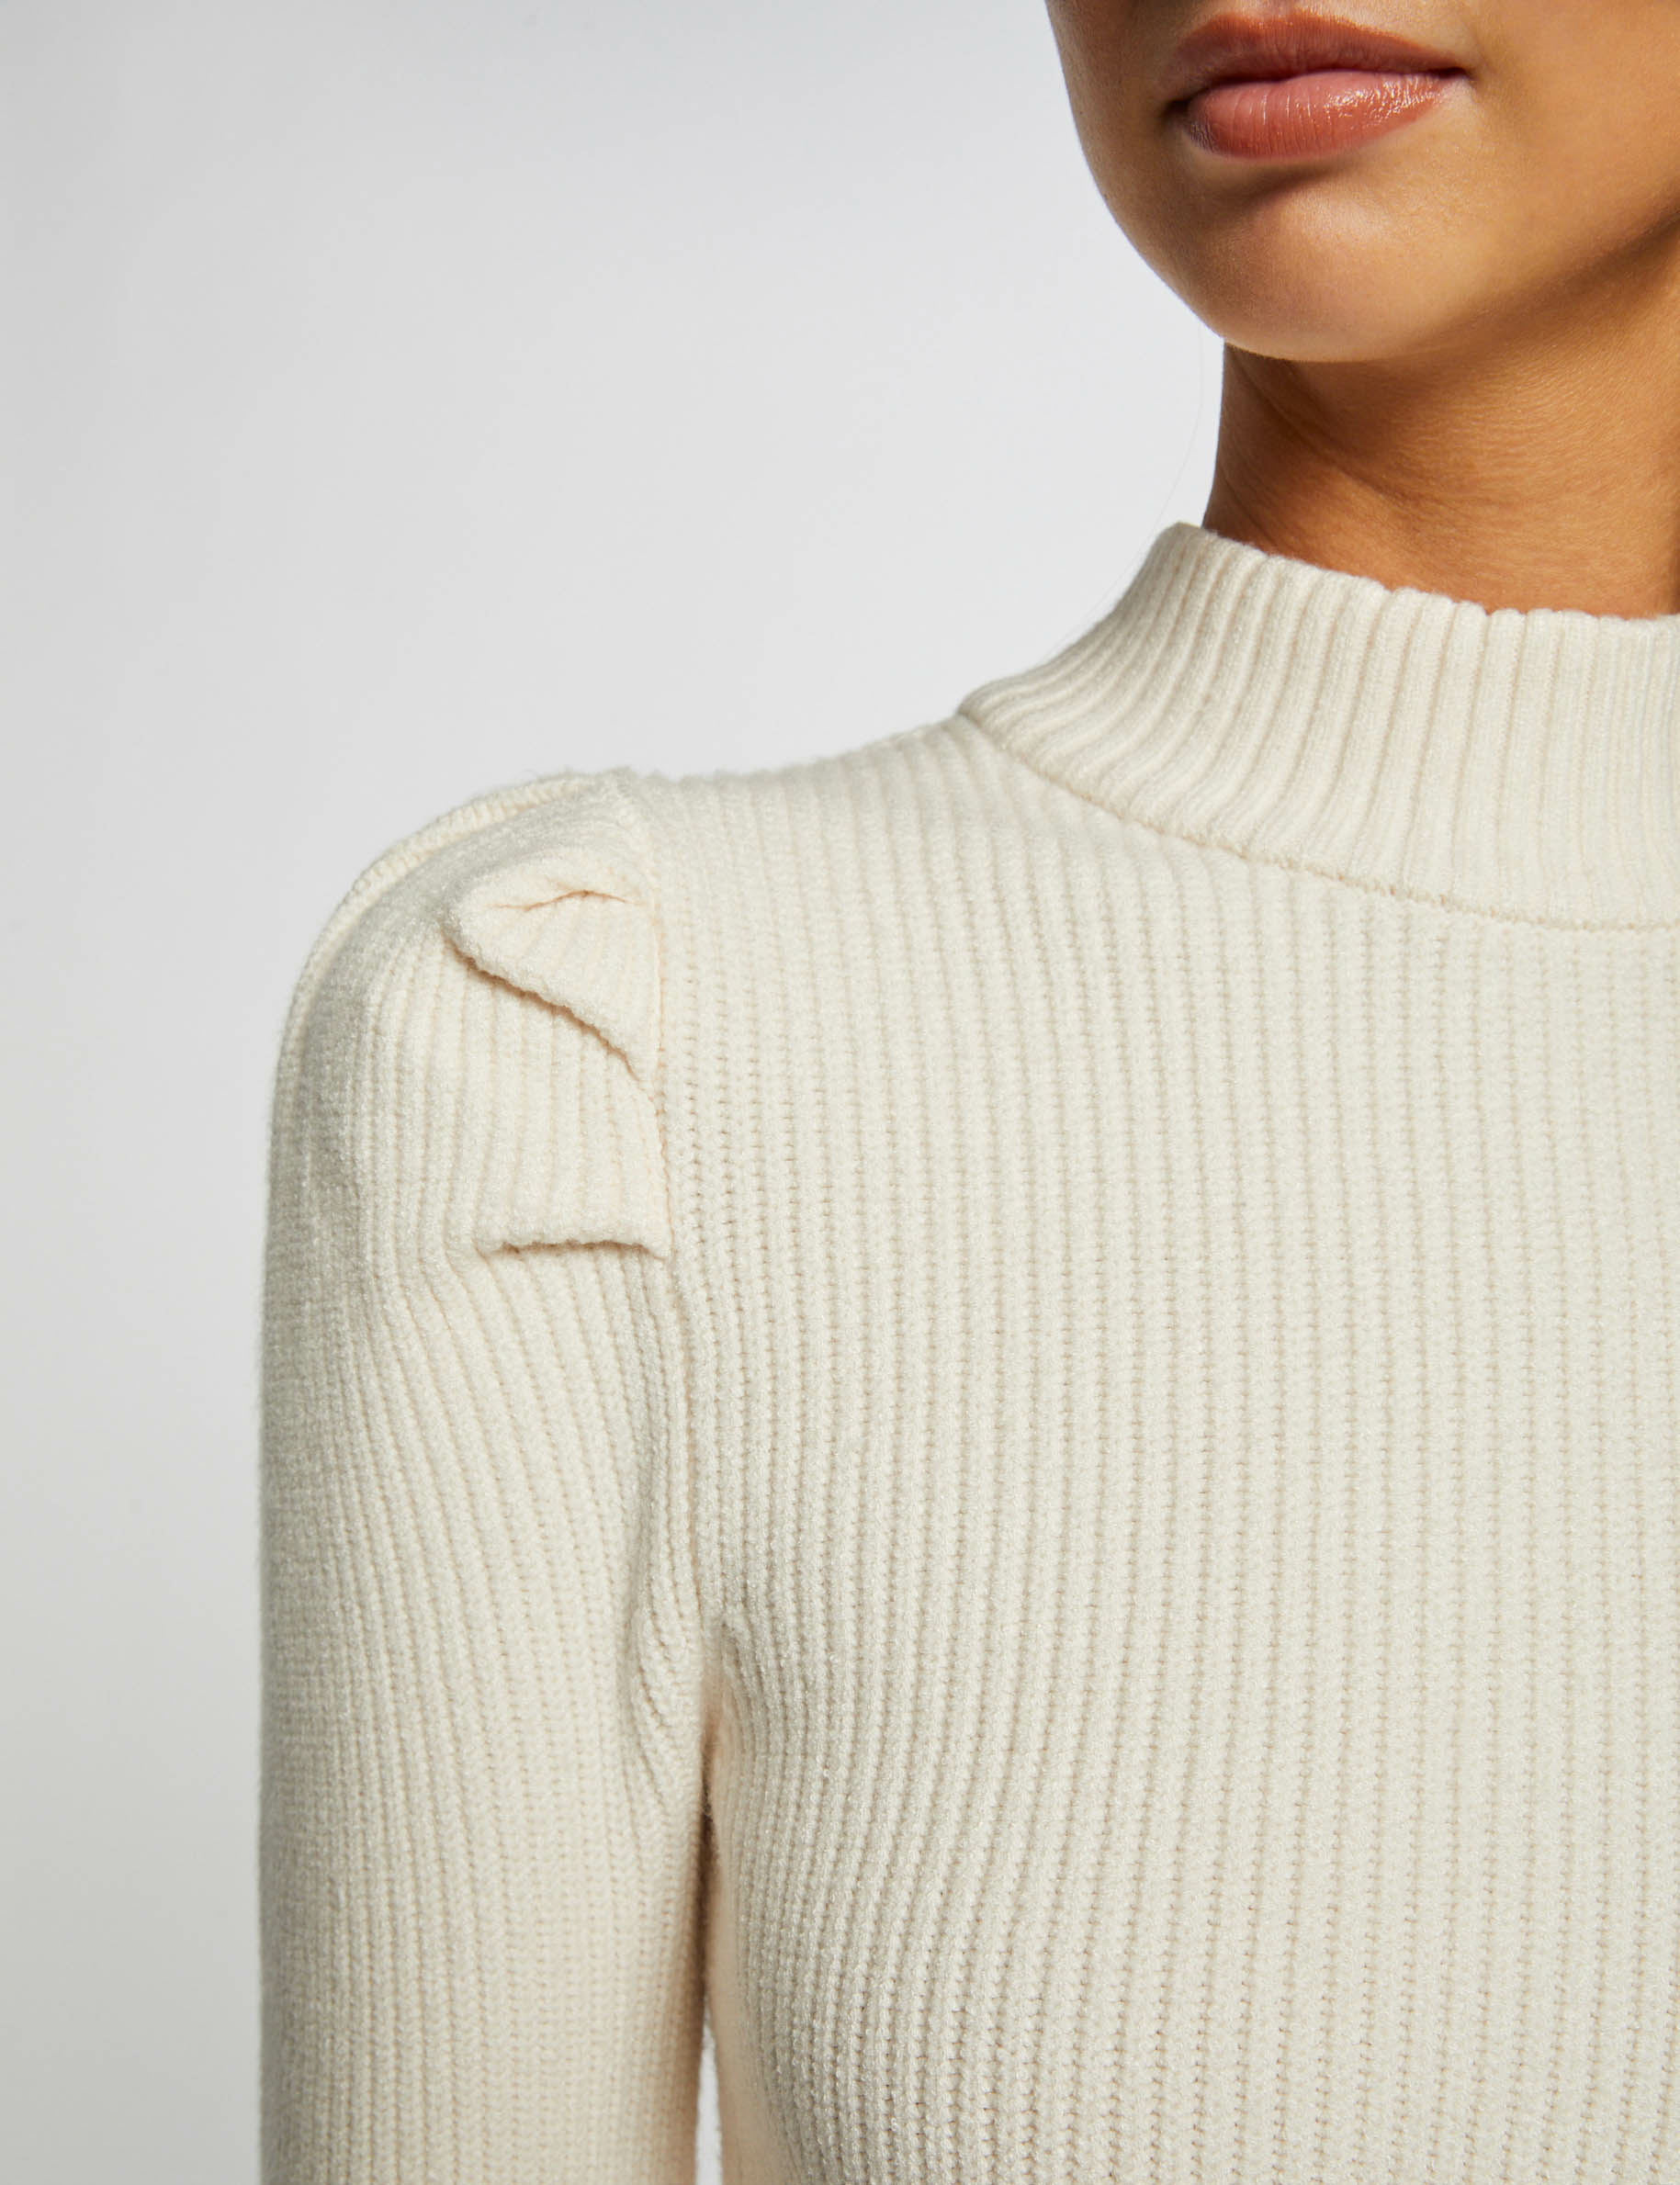 Long-sleeved jumper with high collar ivory ladies'